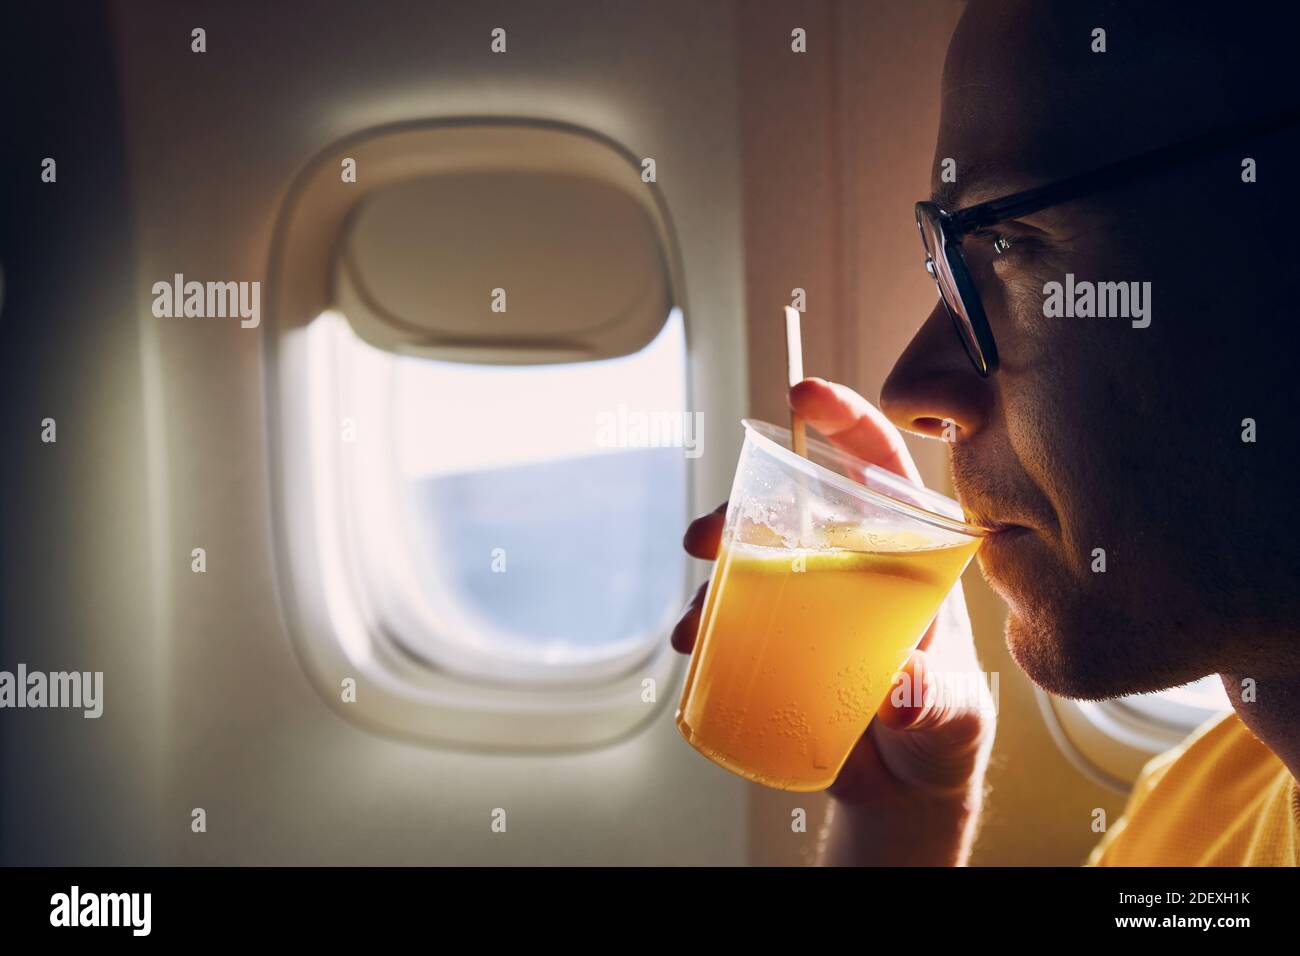 Young passenger enjoying dring during flight. Man holding cocktail against airplane window. Stock Photo